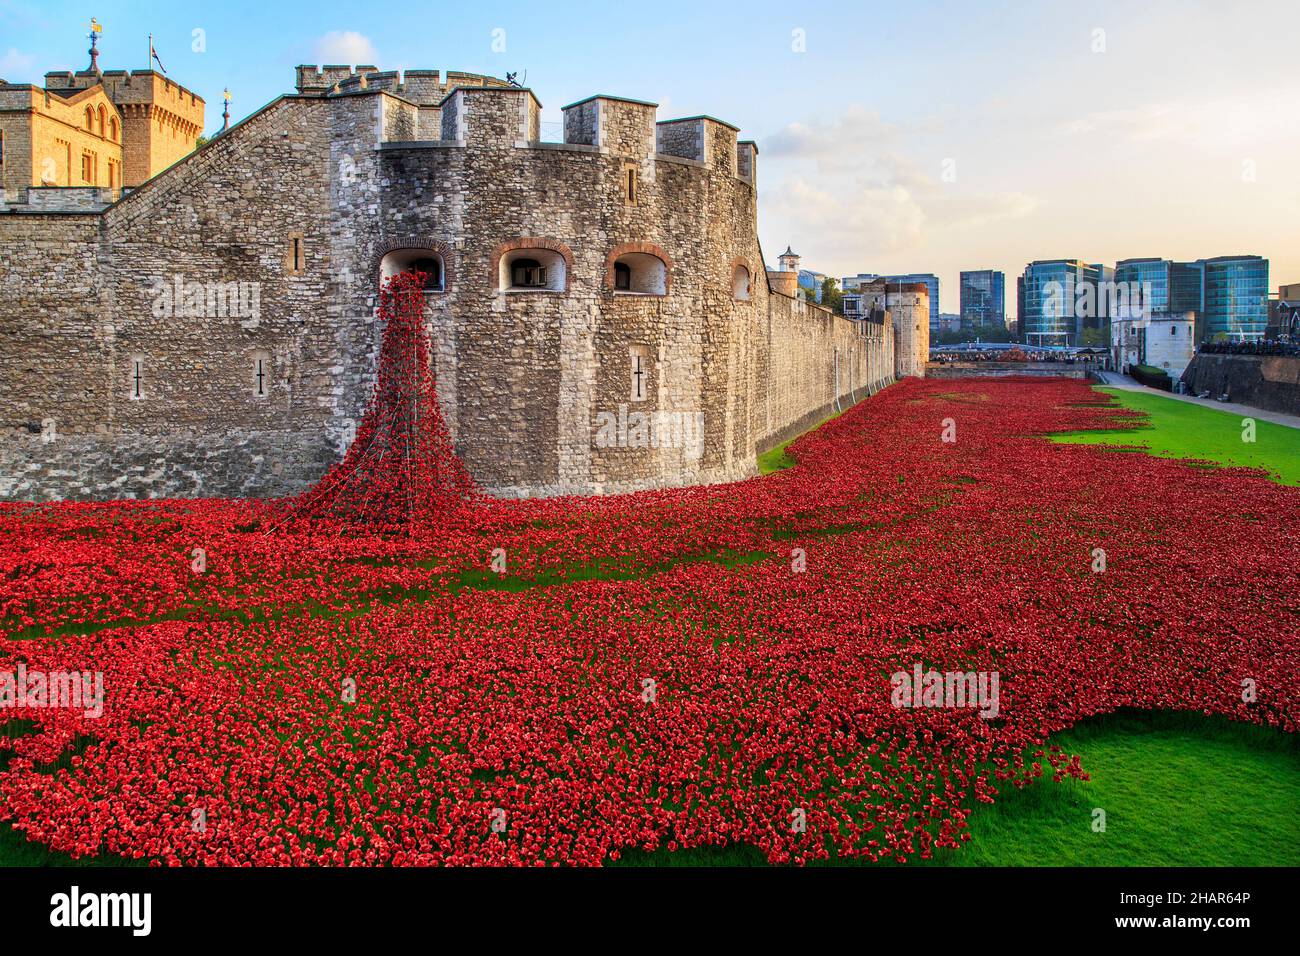 LONDON, GREAT BRITAIN - SEPTEMBER 21, 2014: This is an installation of ceramic red poppies in memory of those killed in the First World War in the moa Stock Photo